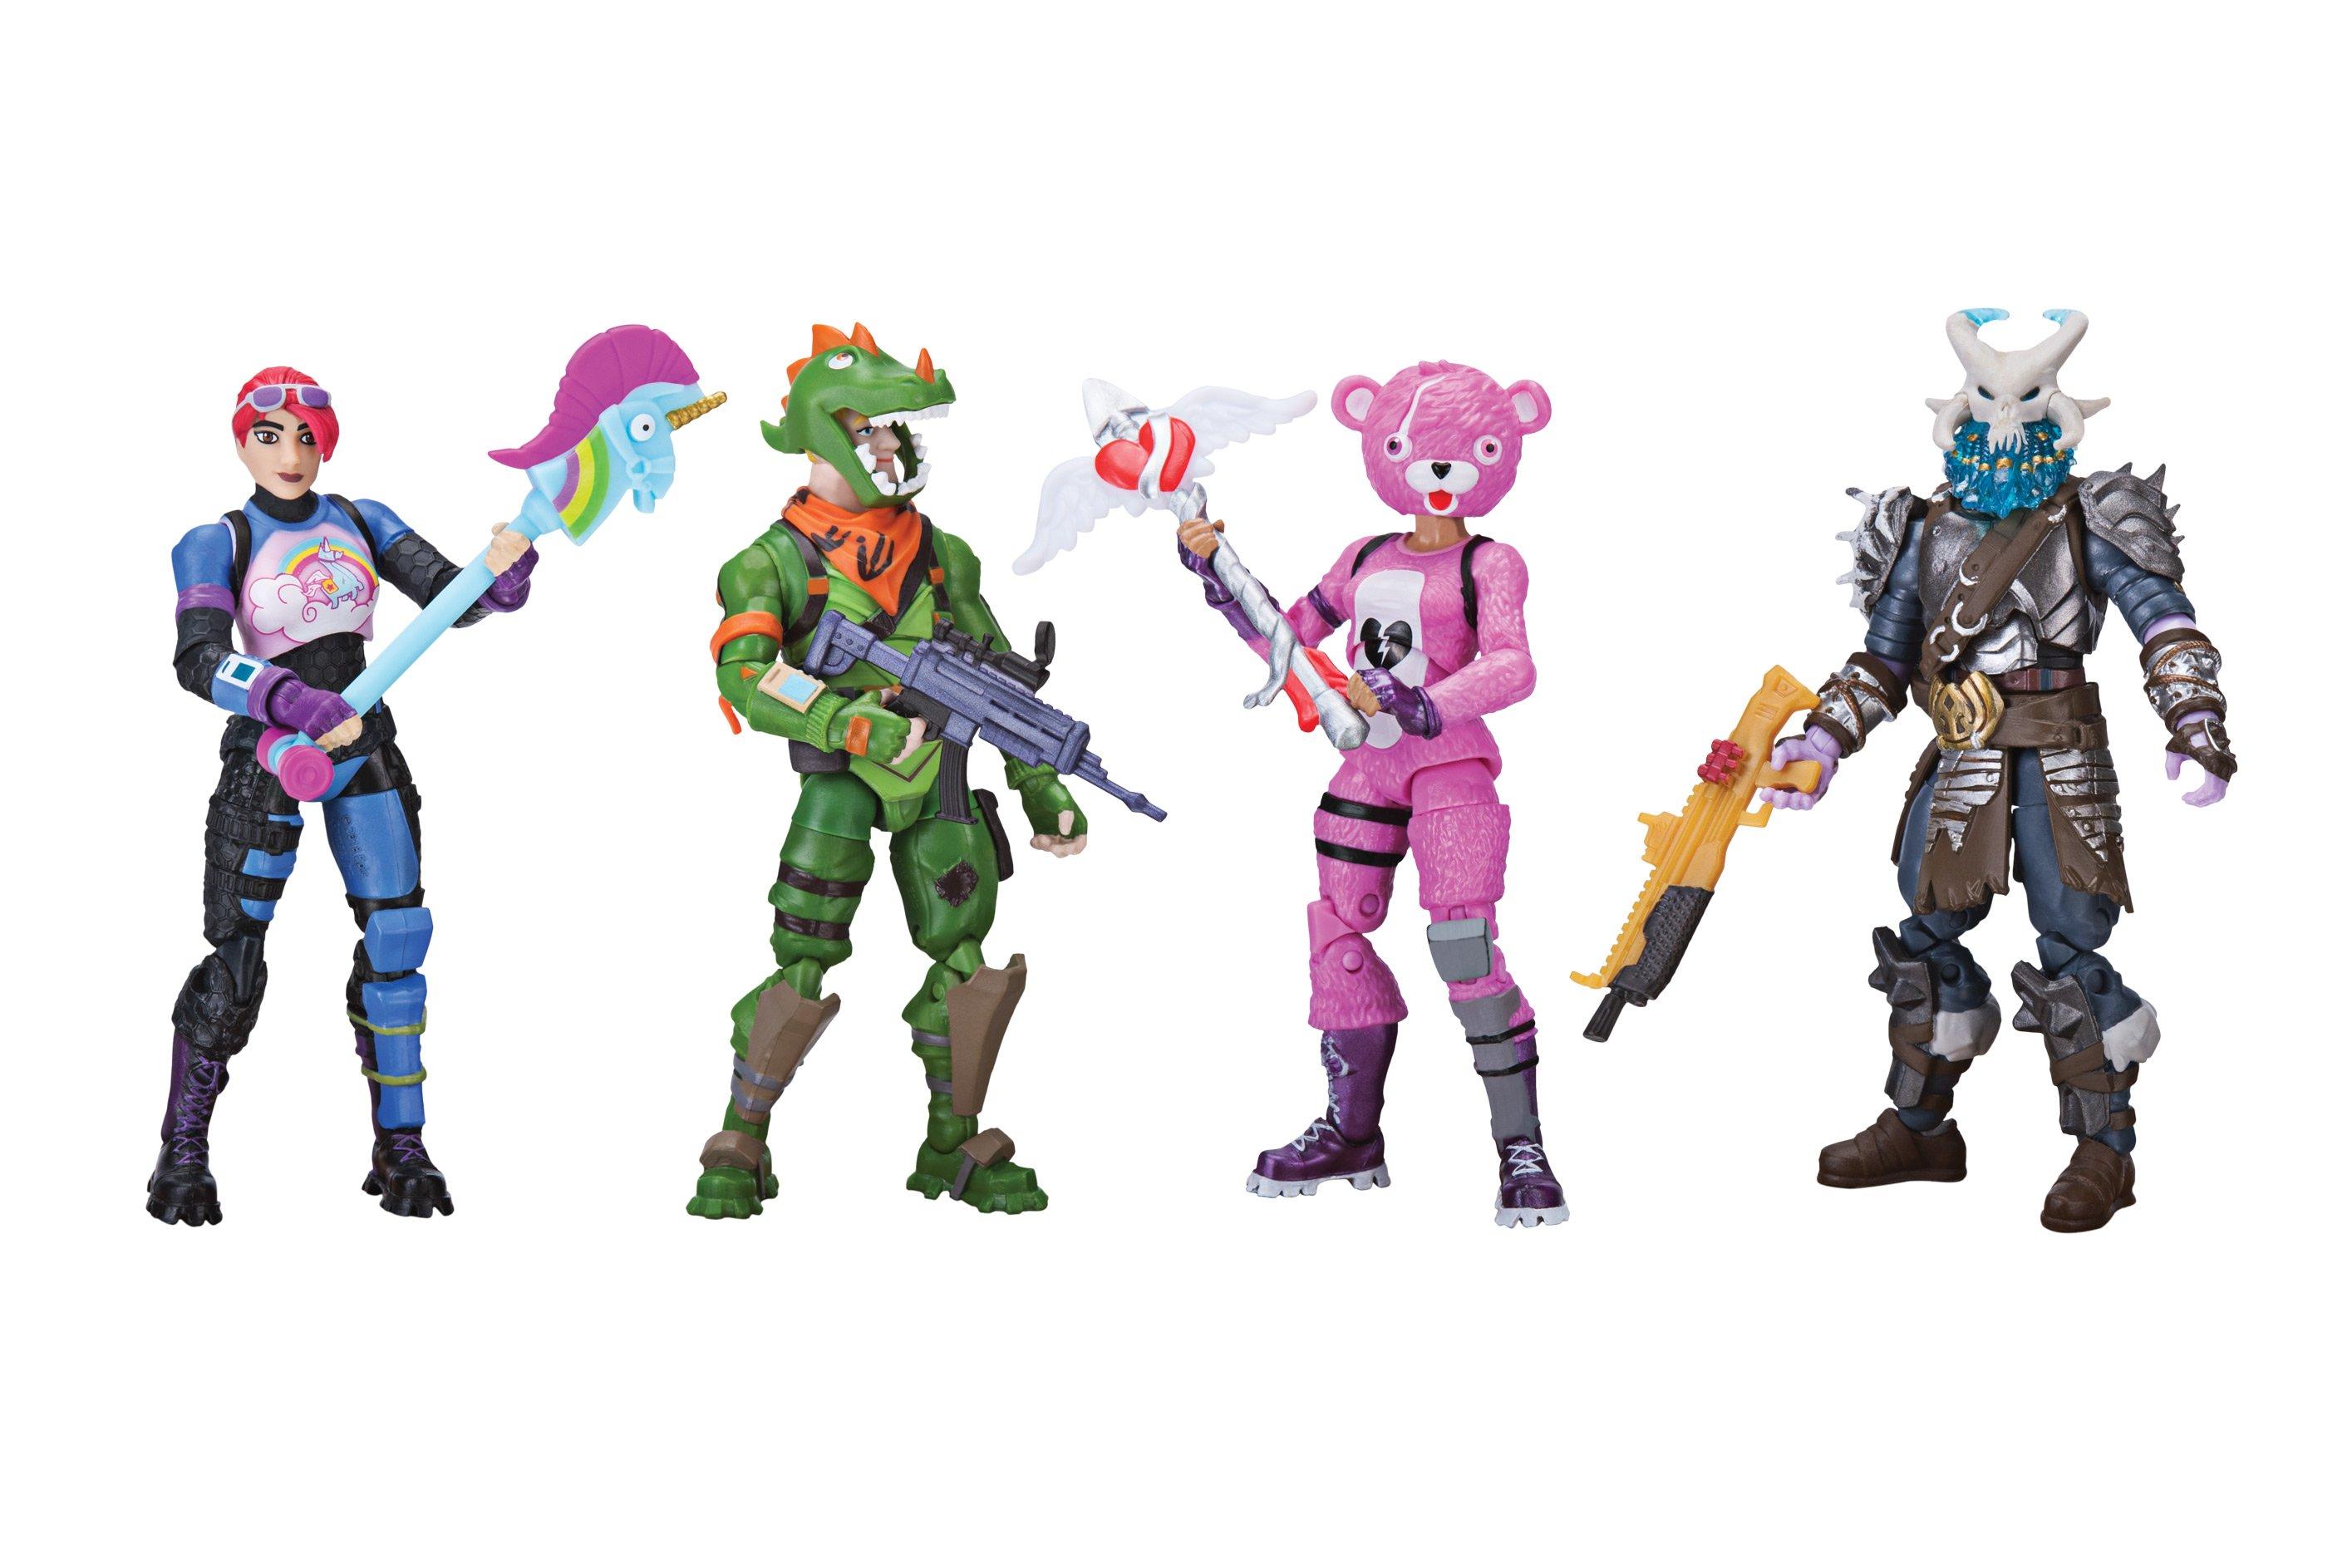 How Much Does Fortnite Toys Cost In Gamestop Fortnite Squad Mode Action Figure 4 Pack Gamestop